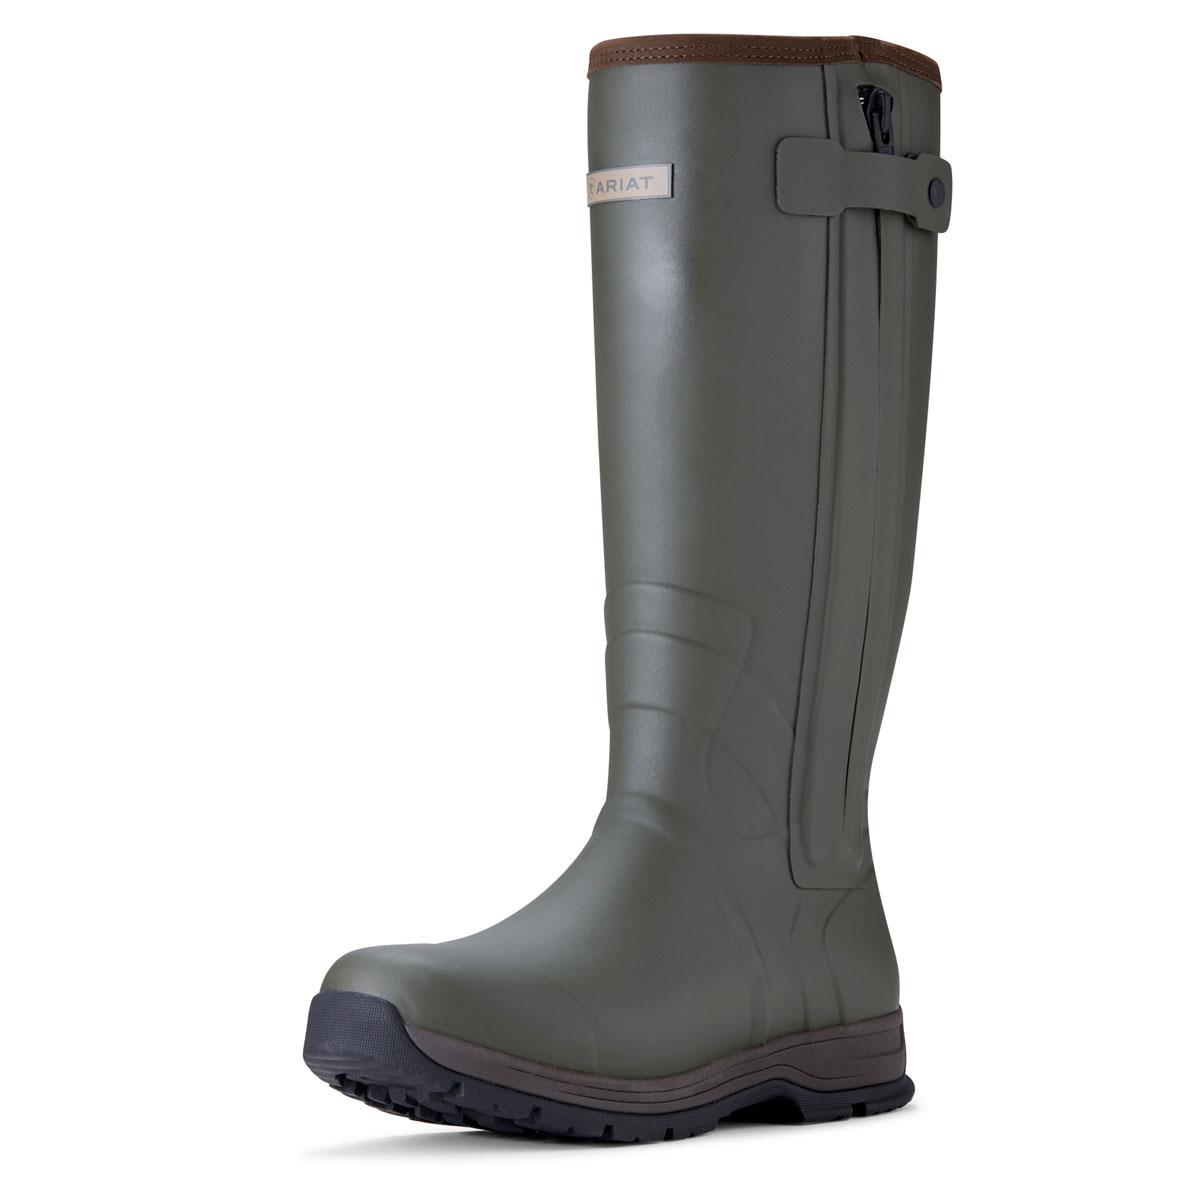 Ariat Mens Burford Insulated Zip Wellington Boots Questions & Answers